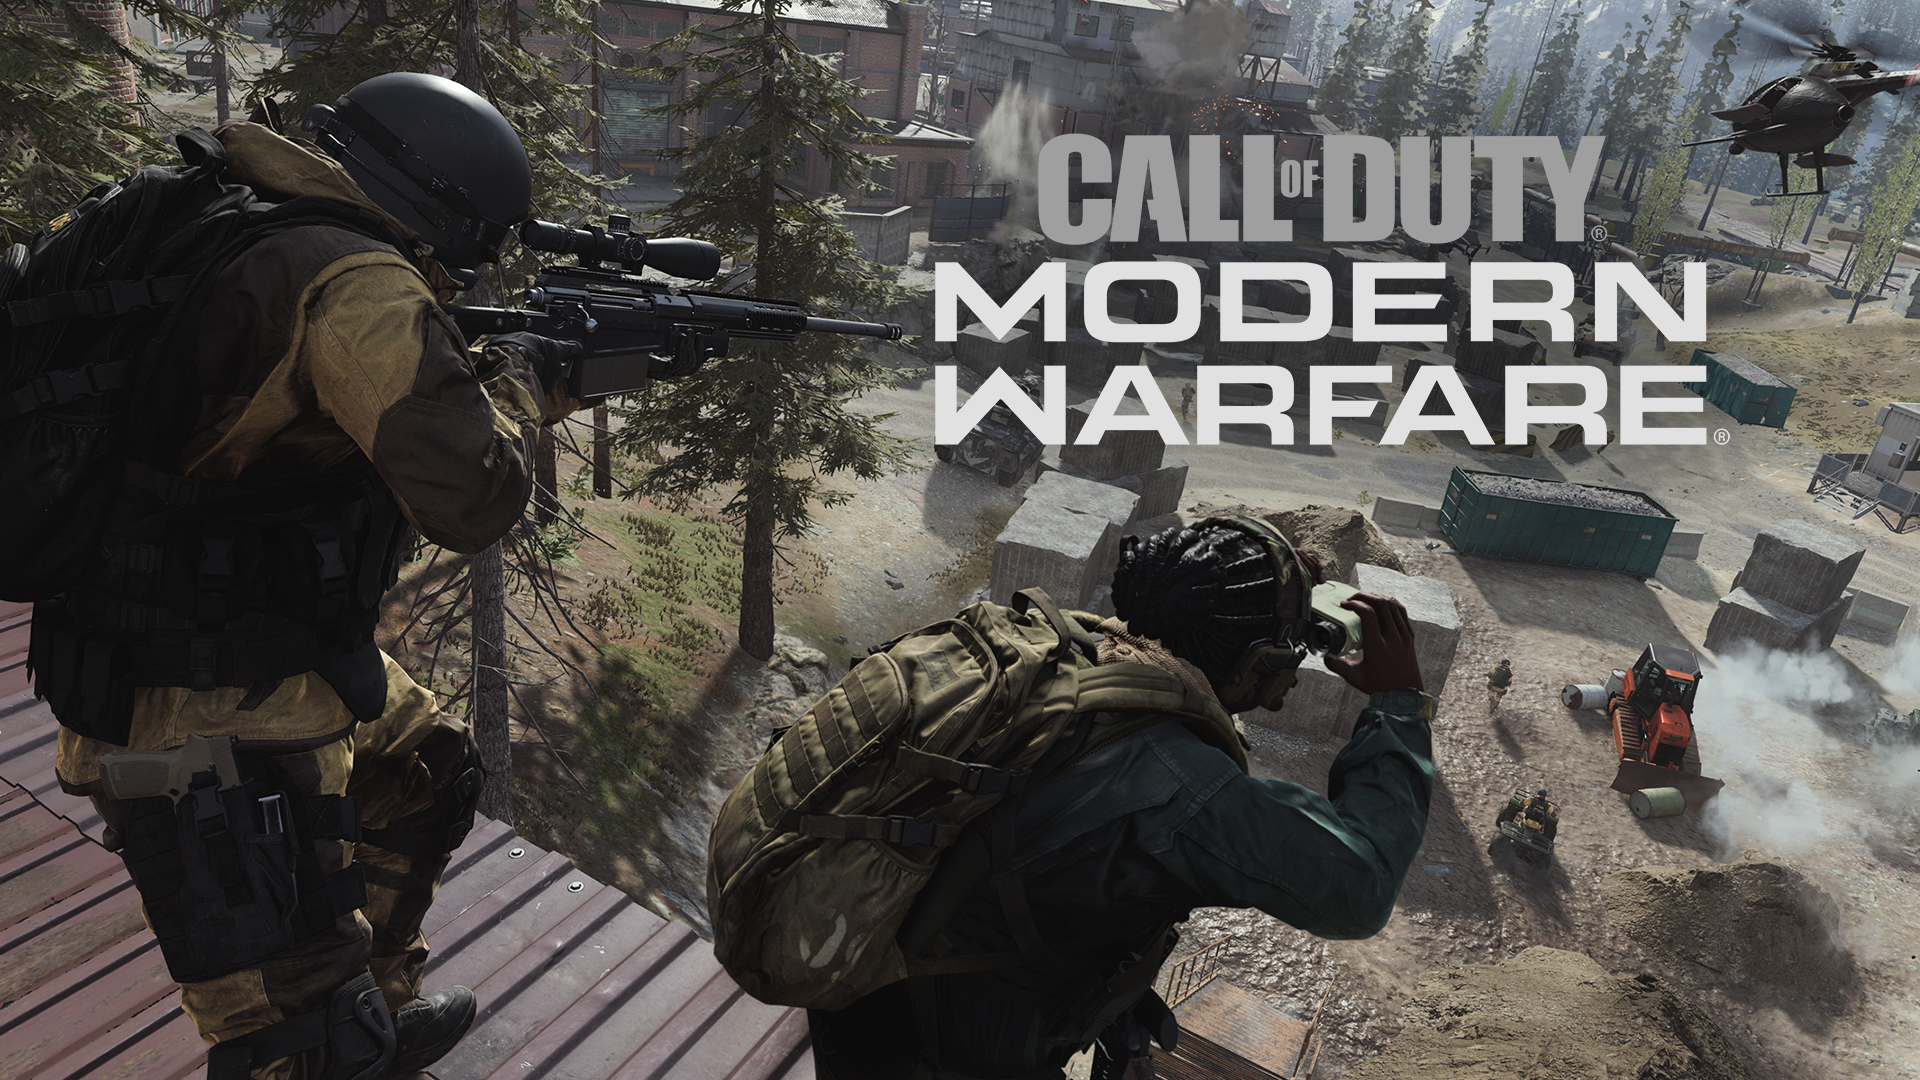 Oprichter Ijzig Weg huis Everything You Need to Know About the Call of Duty: Modern Warfare Beta  Test on Xbox One - Xbox Wire